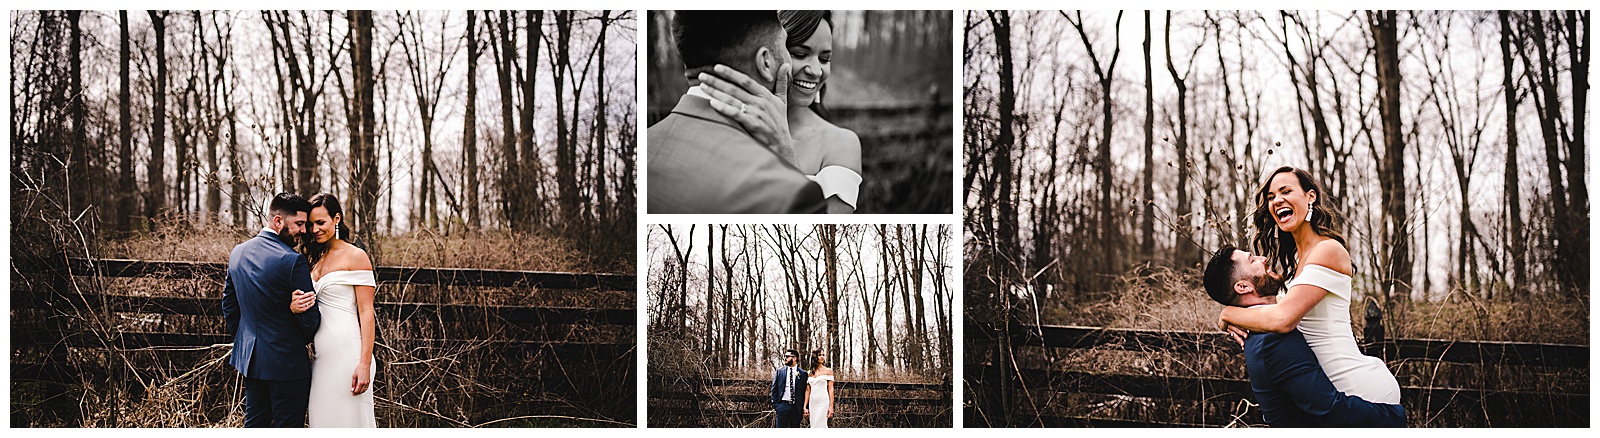 Wedding day emotions, laughter and intimate portraits. 